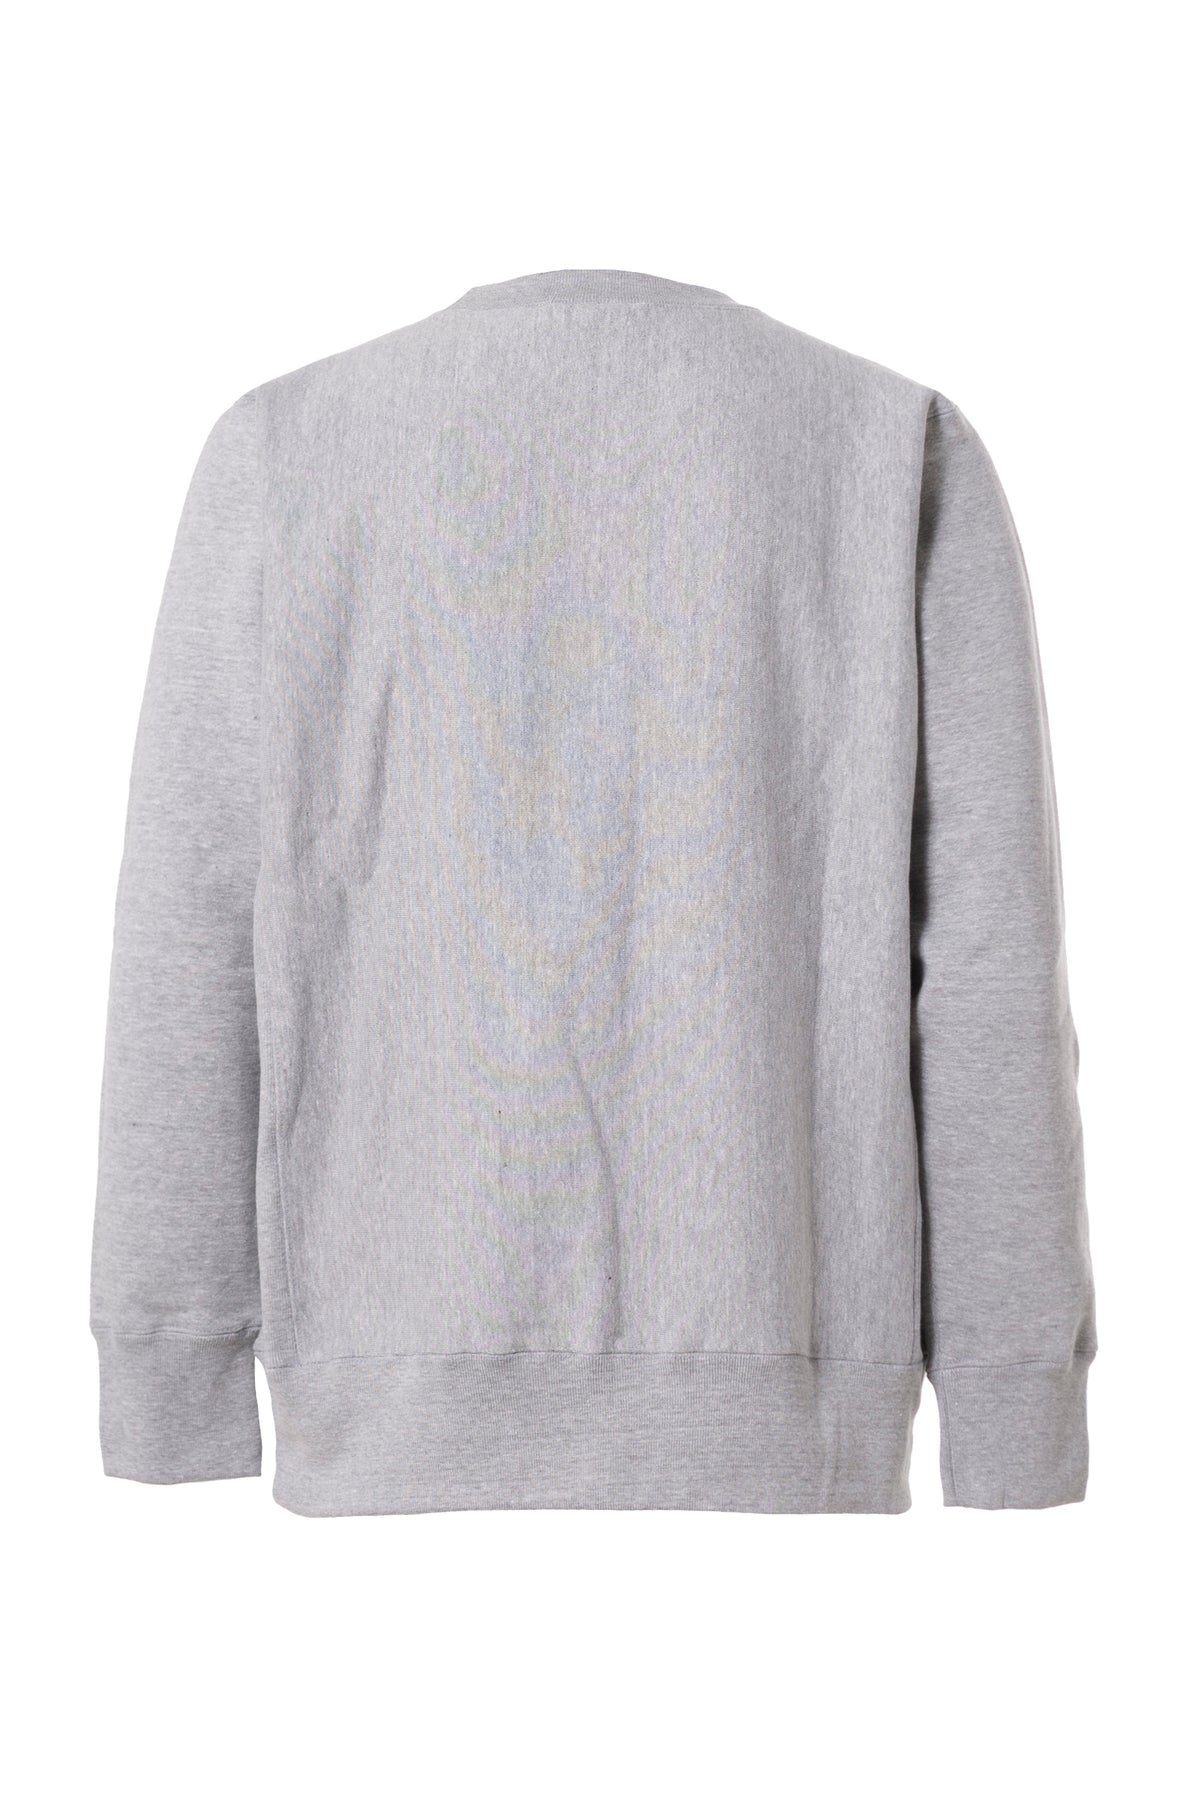 Plusticview COLLEGE LOGO SWEATER  / GRY